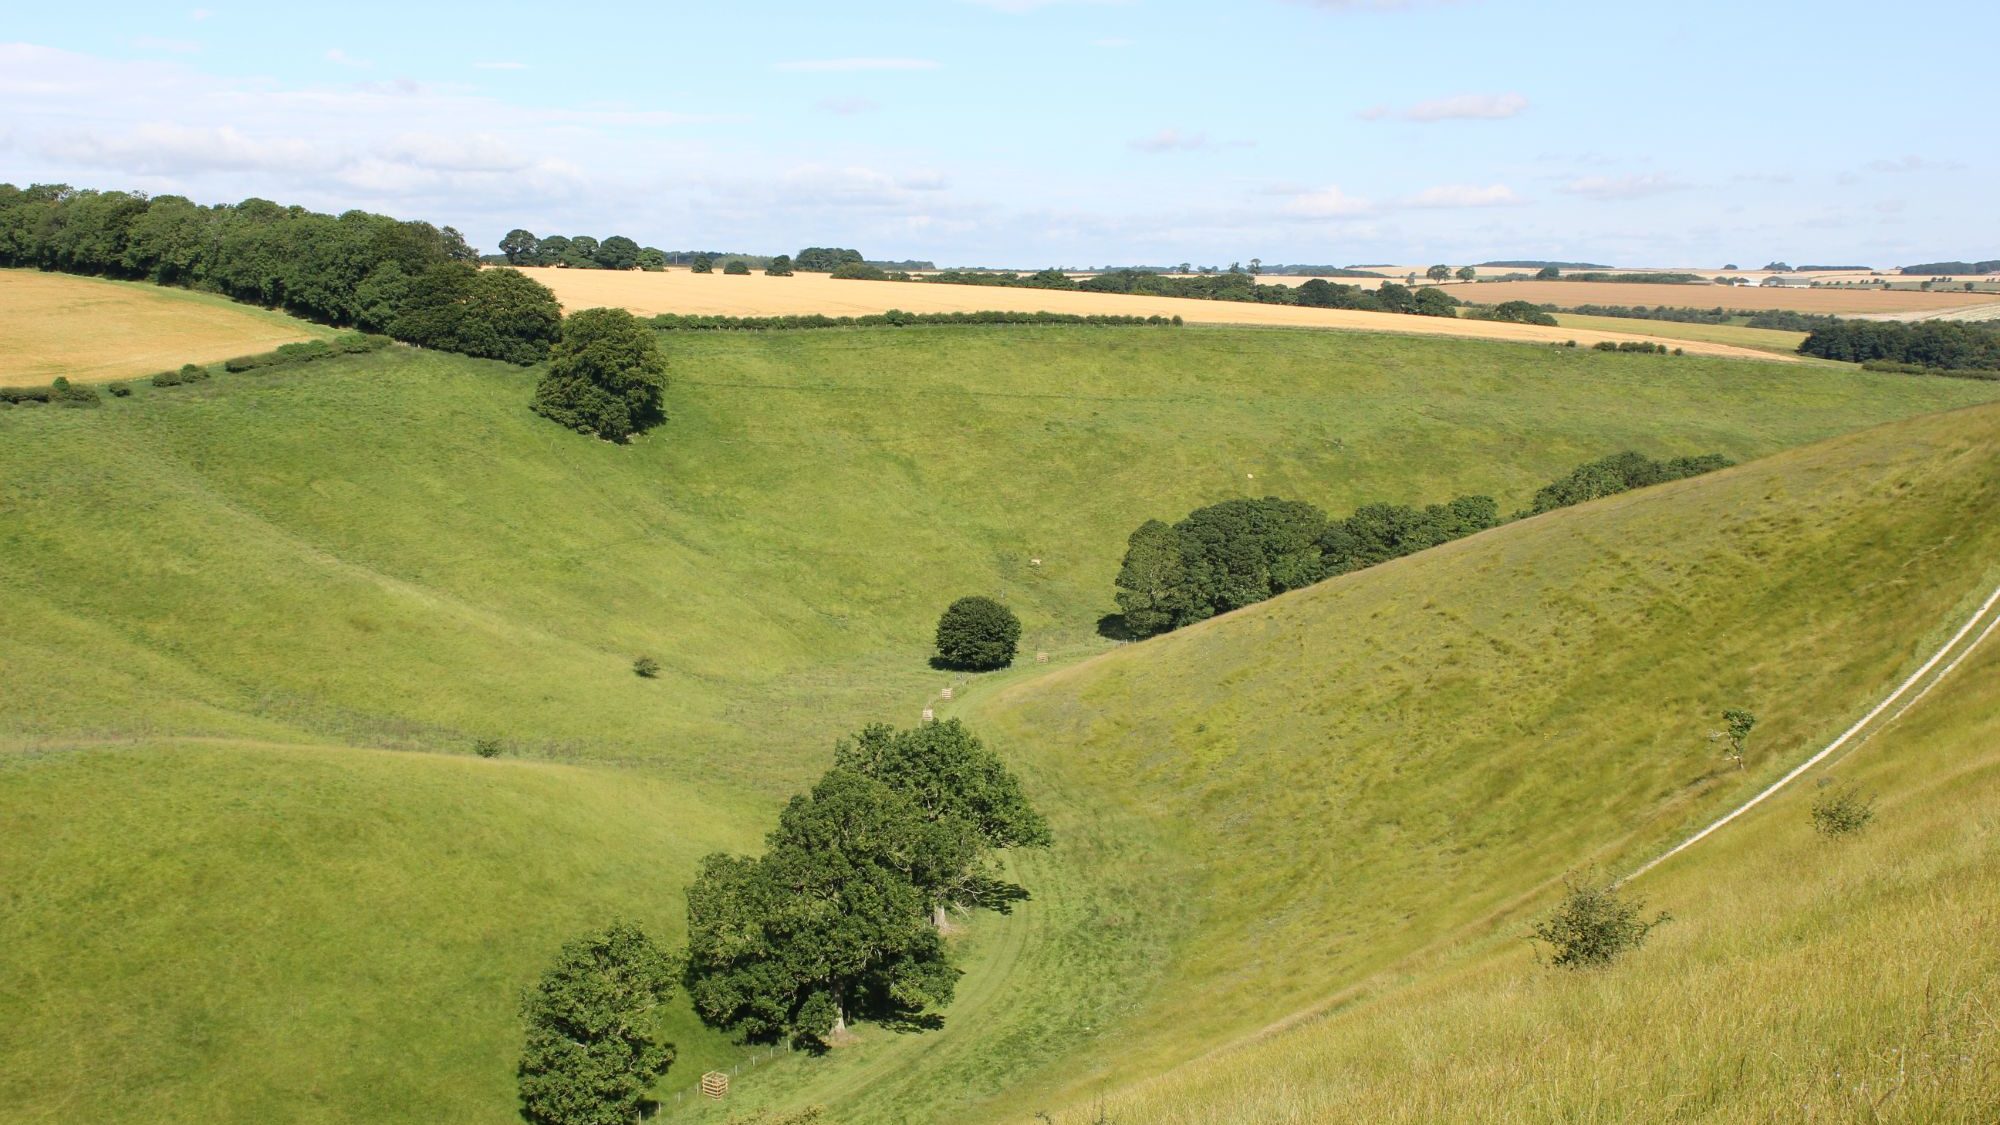 View of hills on the Yorkshire Wolds Way